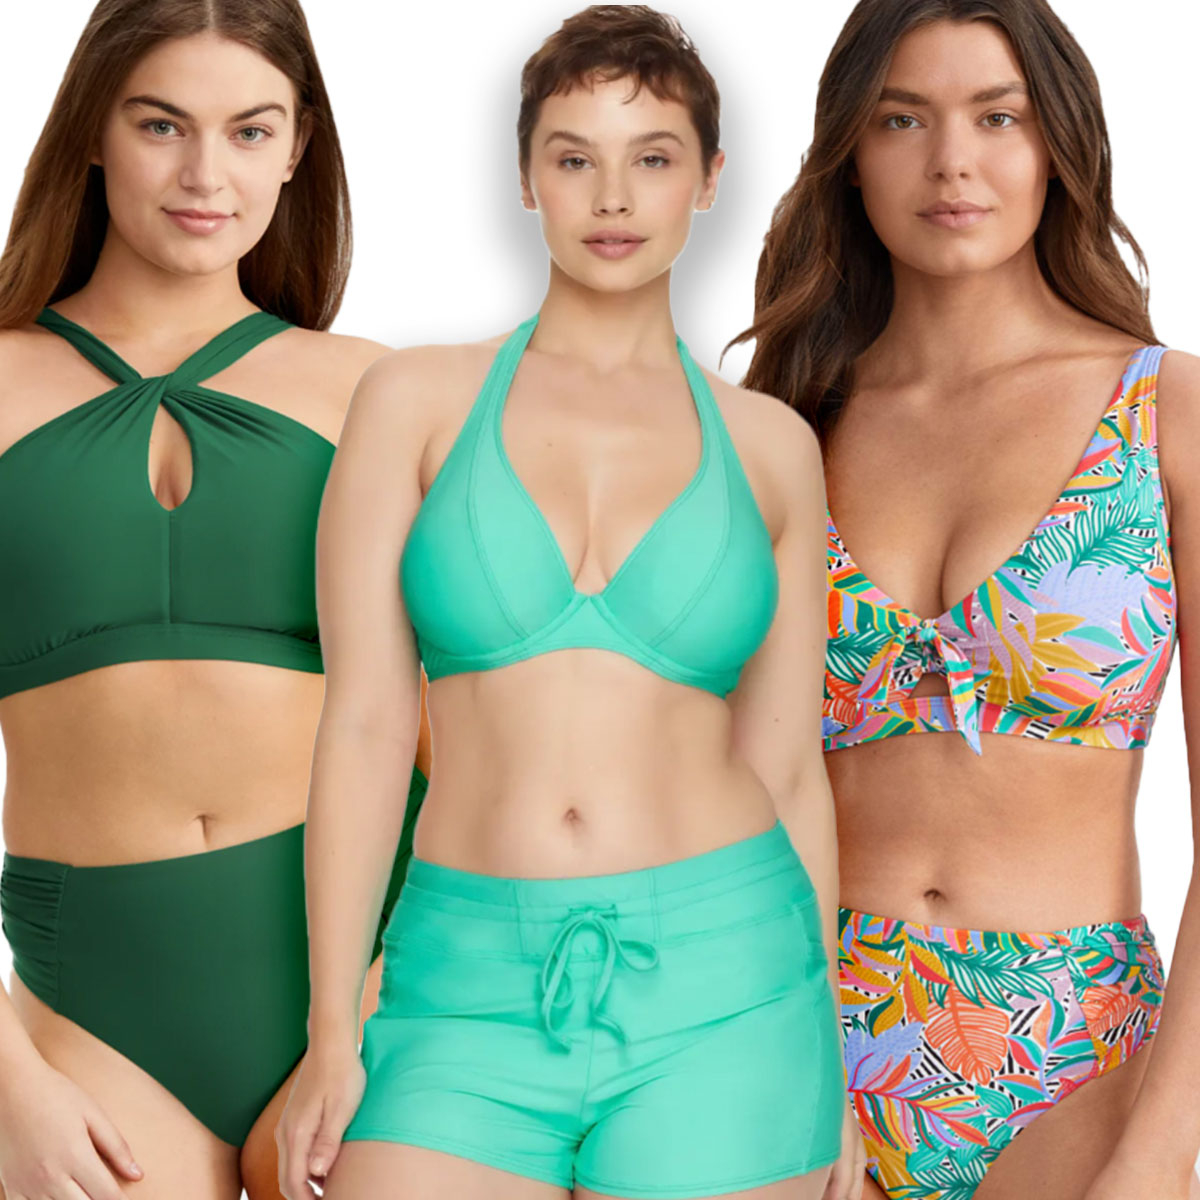 12 Underboob Bikinis & Swimsuits That Have Chic Boob Cut-Outs